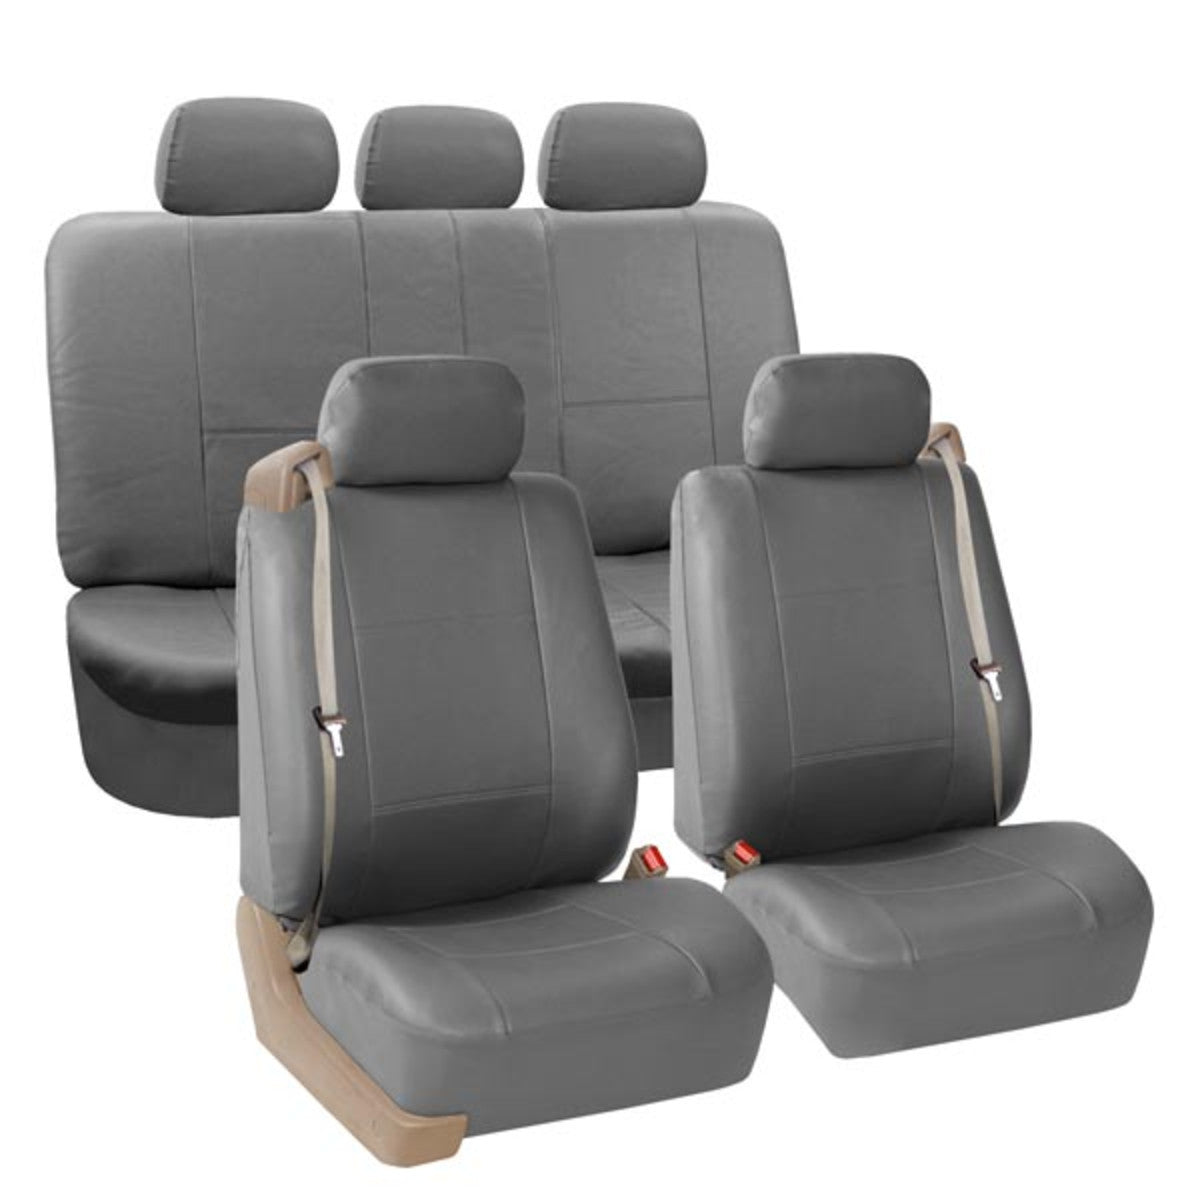 Built-in Seat Belt Compatible PU Leather Seat Covers Gray